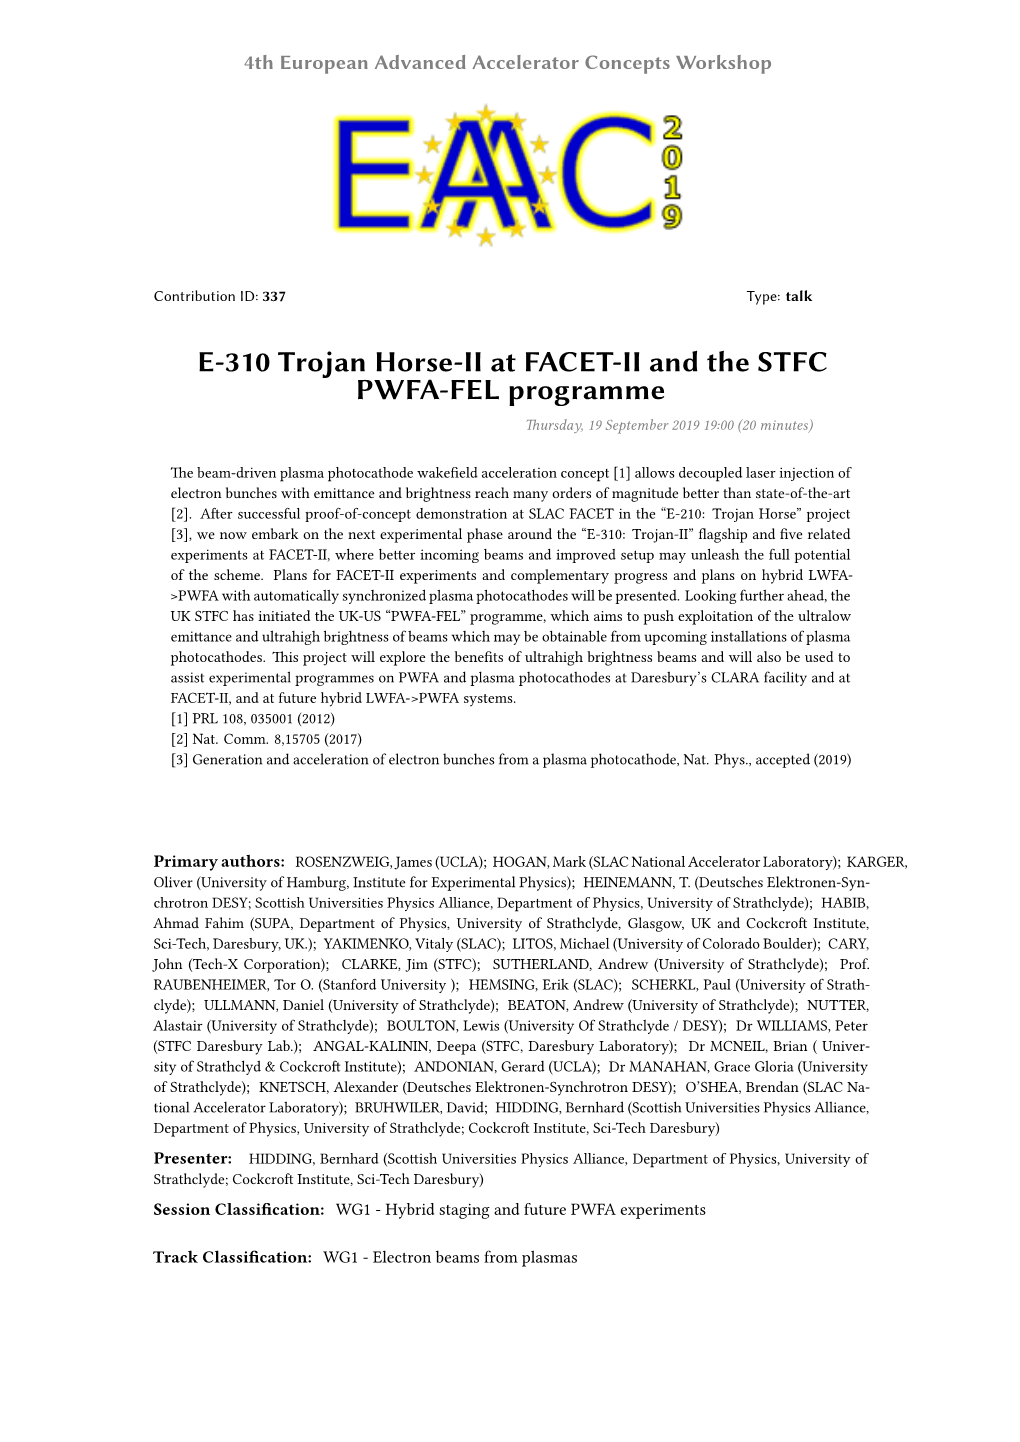 E-310 Trojan Horse-II at FACET-II and the STFC PWFA-FEL Programme Thursday, 19 September 2019 19:00 (20 Minutes)